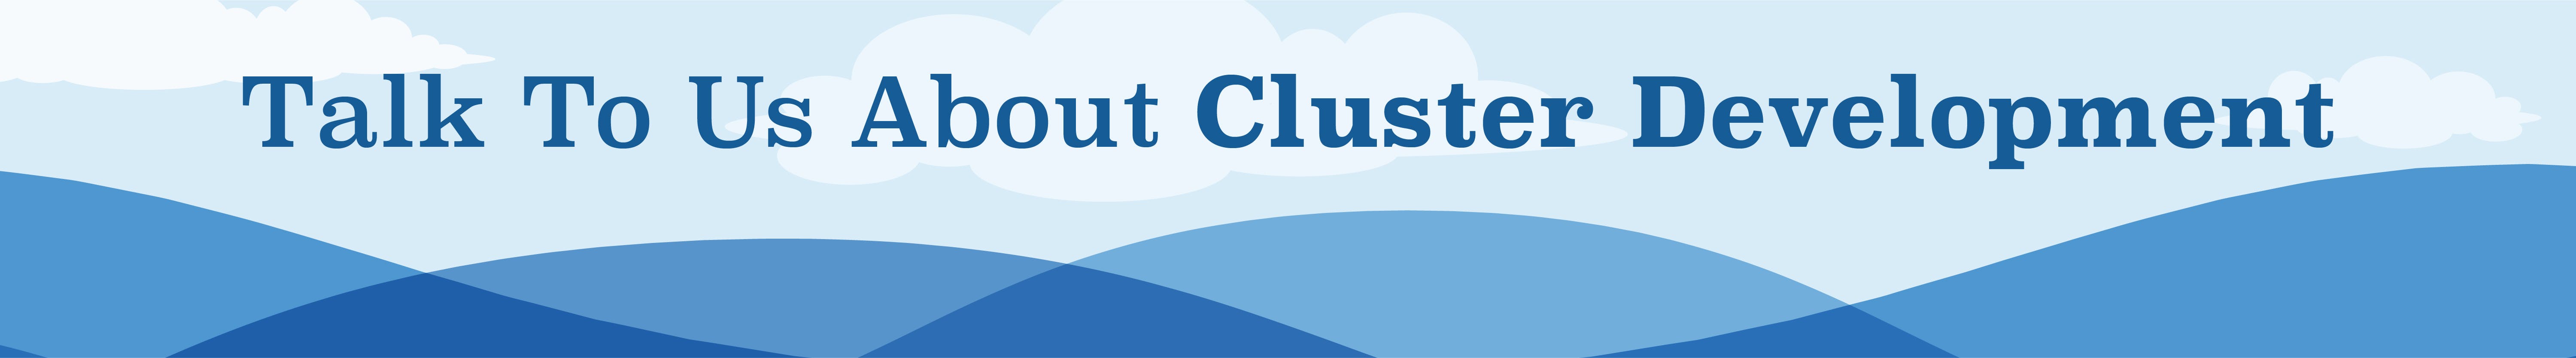 Talk to use about cluster development